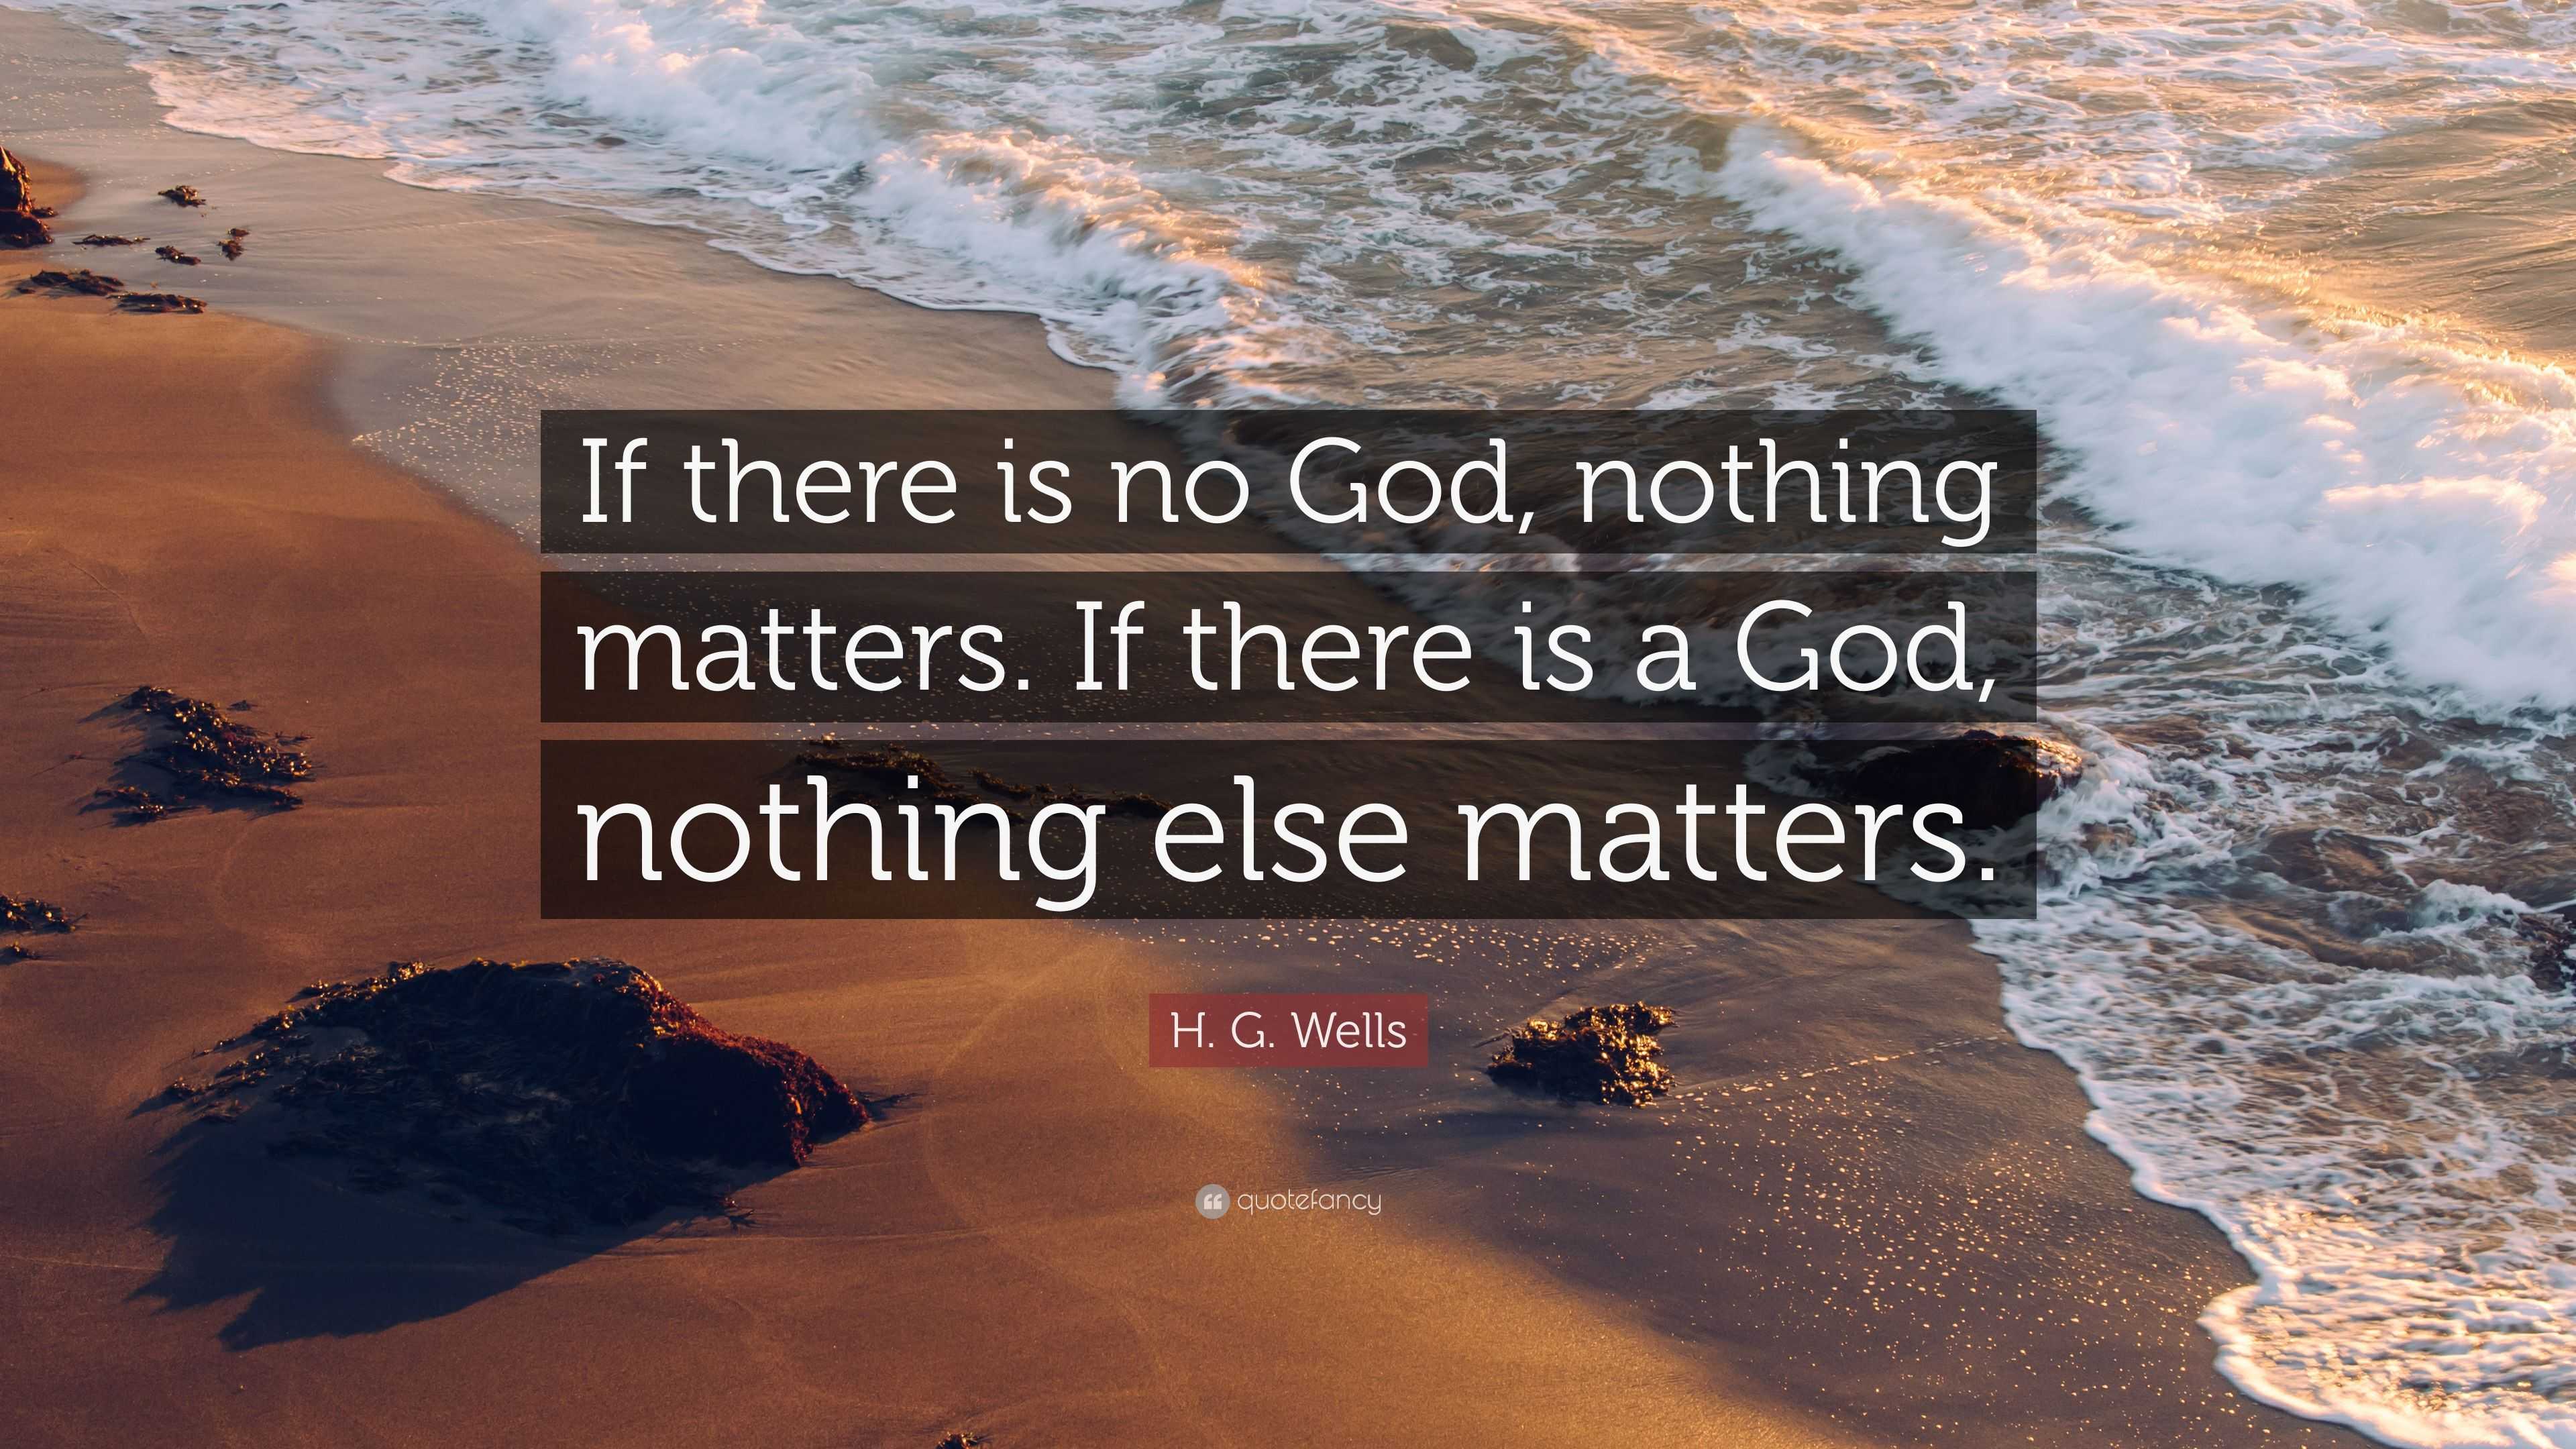 H G Wells Quote “if There Is No God Nothing Matters If There Is A